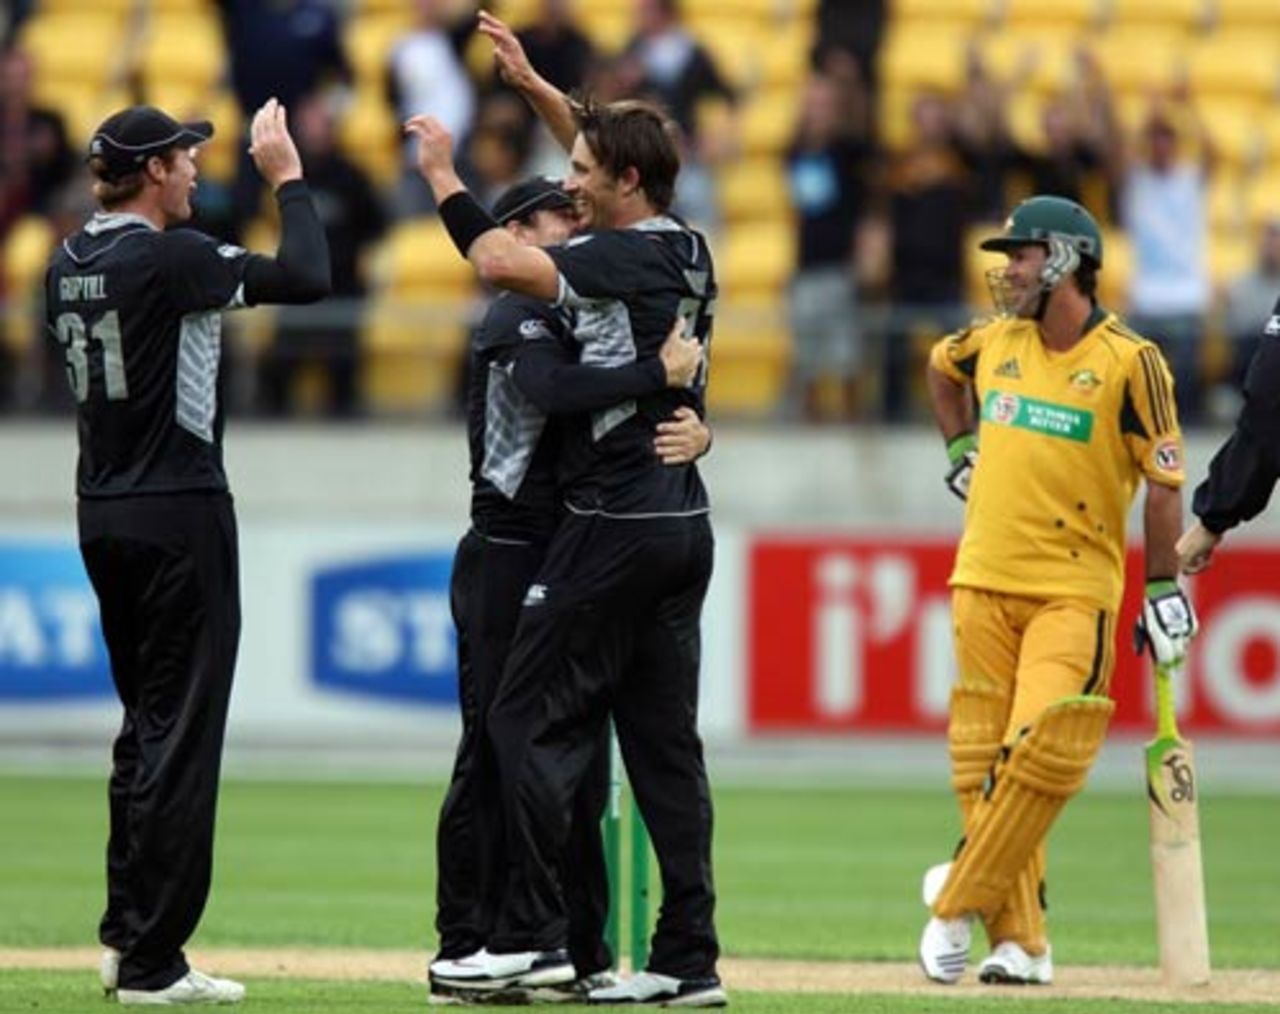 Shane Bond celebrates and Ricky Ponting can't believe it after being given out caught off his helmet, New Zealand v Australia, 5th ODI, Wellington, March 13, 2010